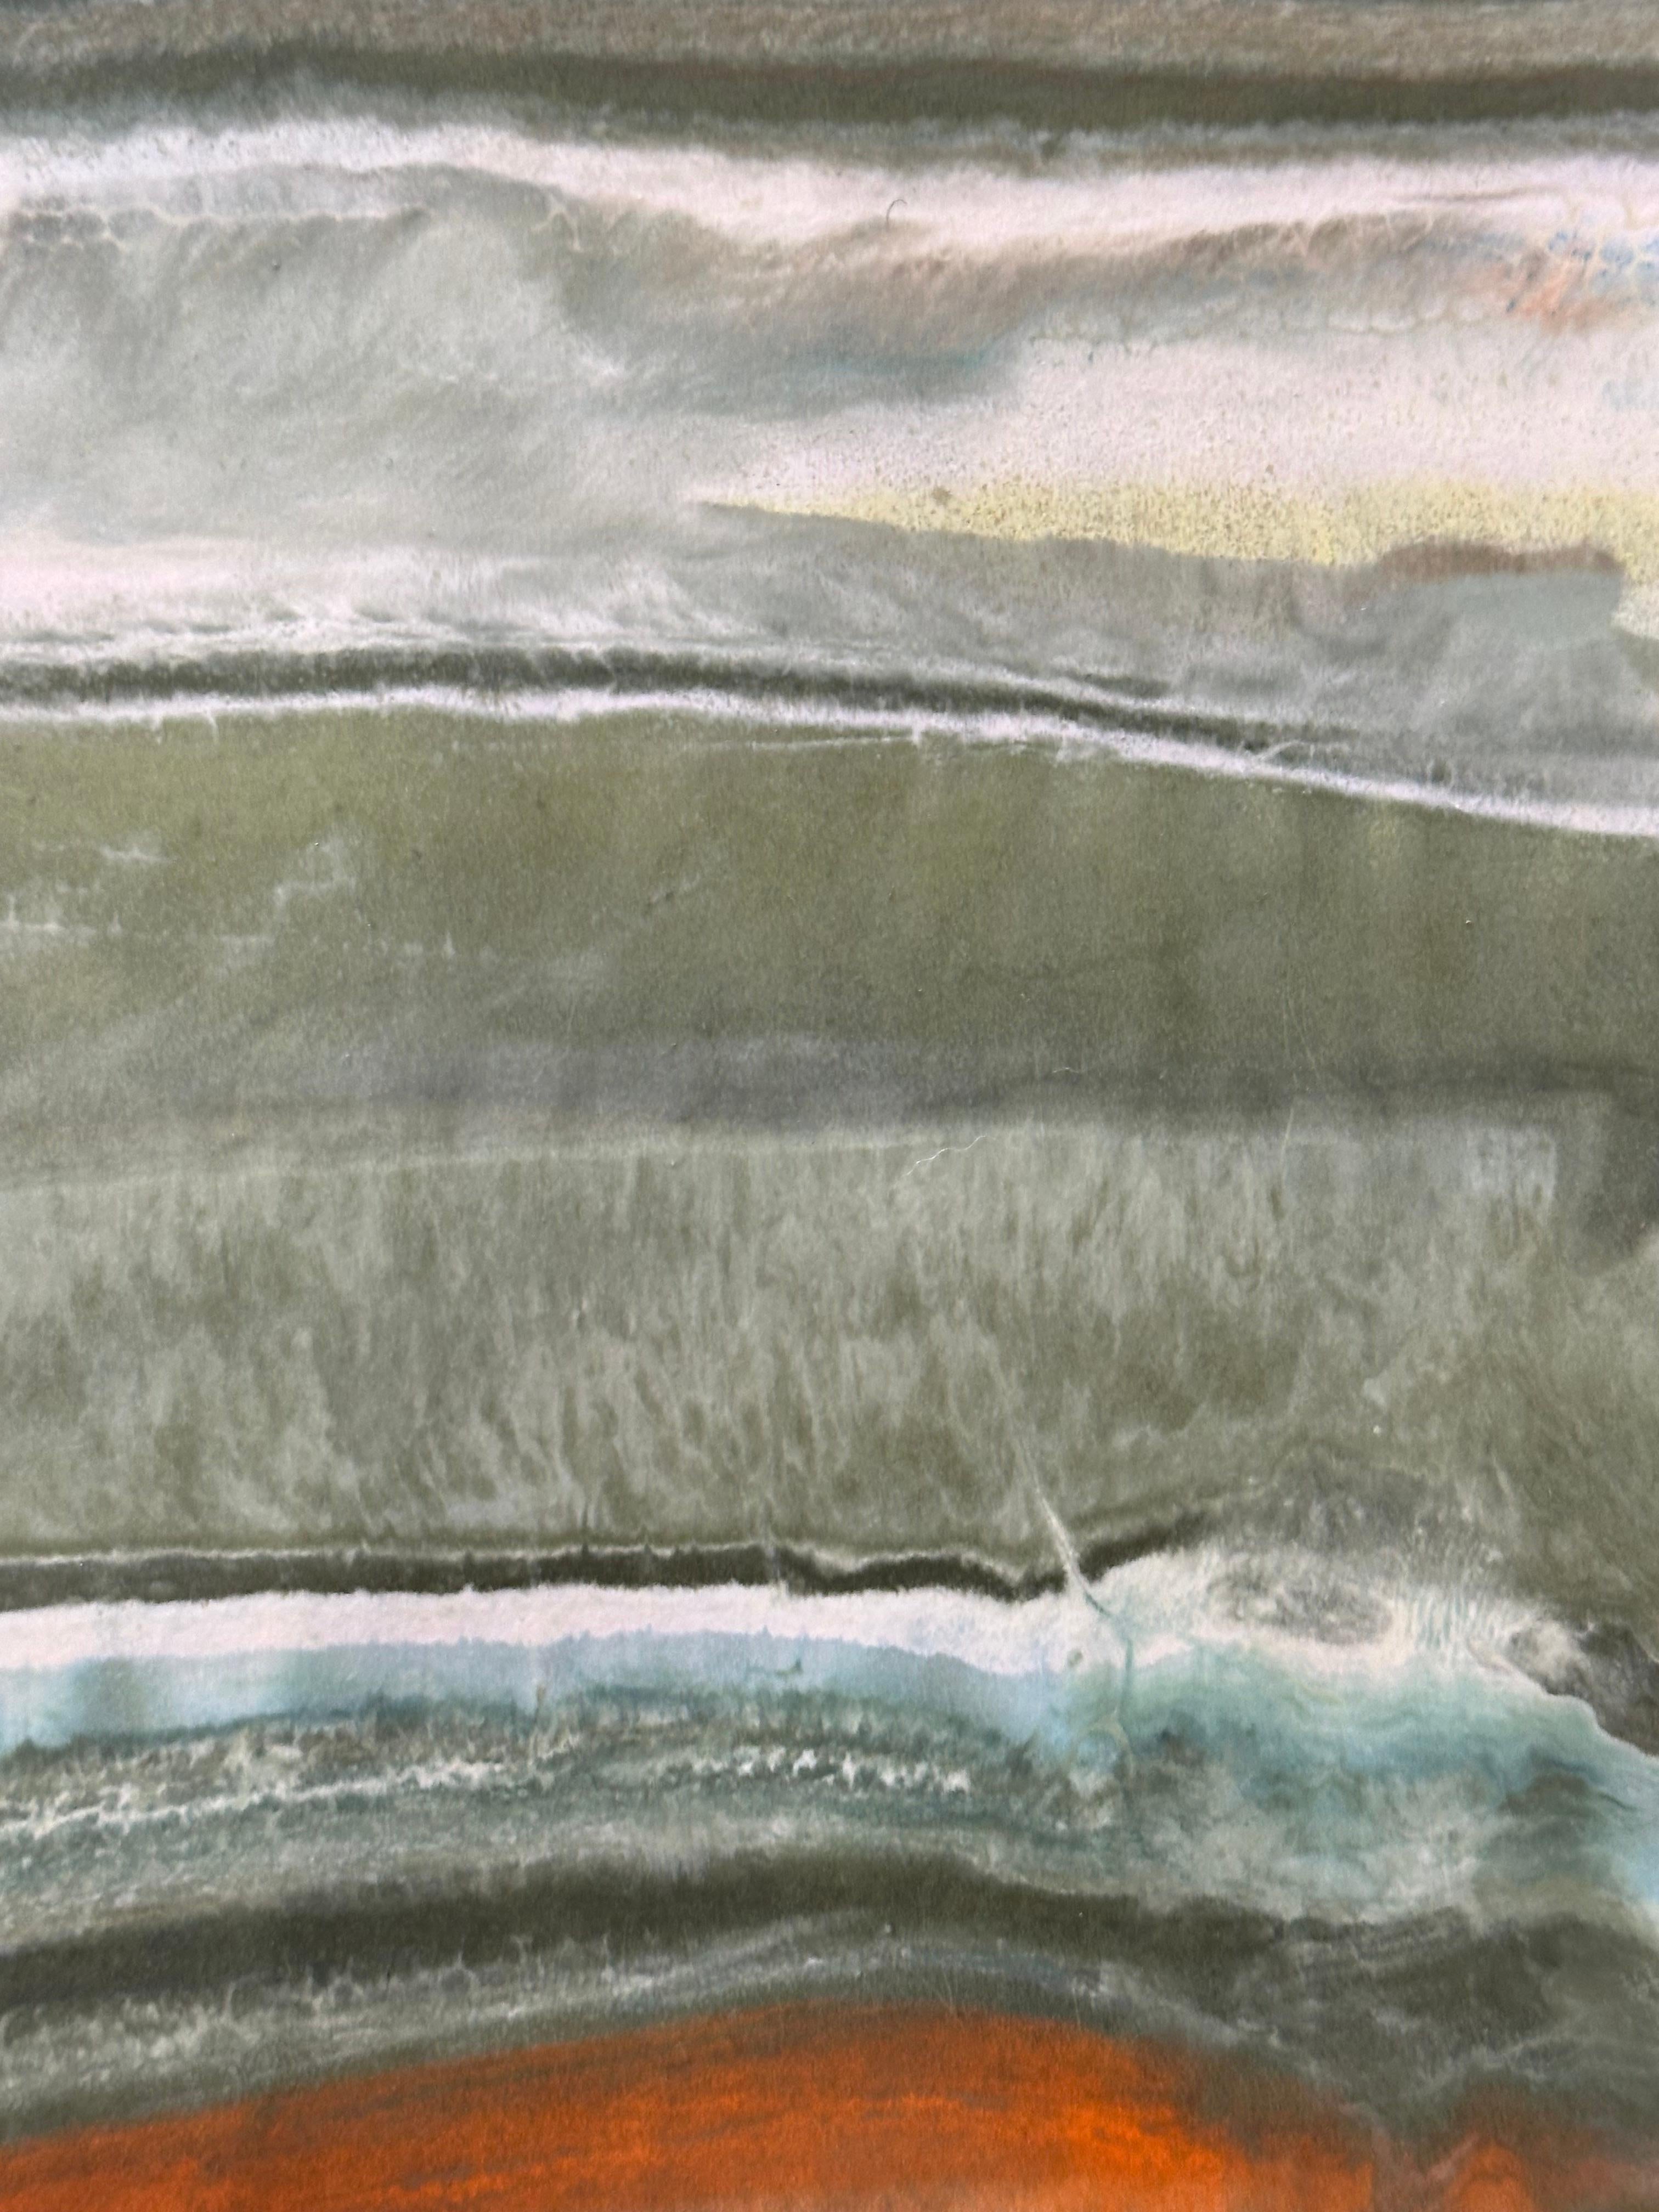 Laura Moriarty's Talking to Rocks 27 is a multicolored encaustic monotype on kozo paper. Layers of pigmented beeswax on lightweight paper create an undulating composition suggesting layers of the earth's crust and geological formations depicted in